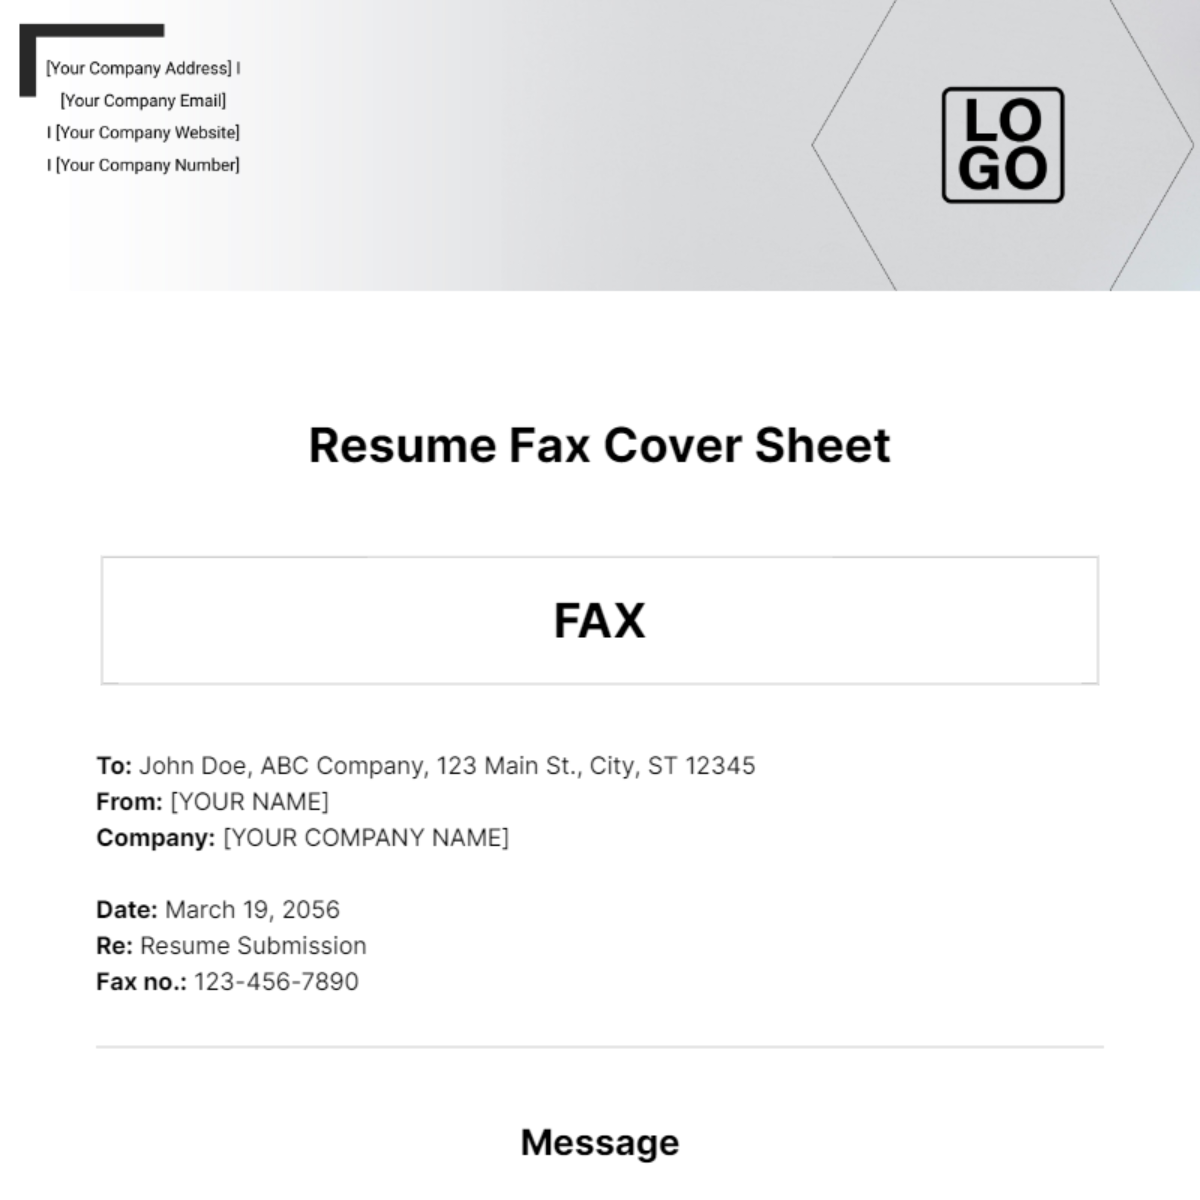 Resume Fax Cover Sheet Template